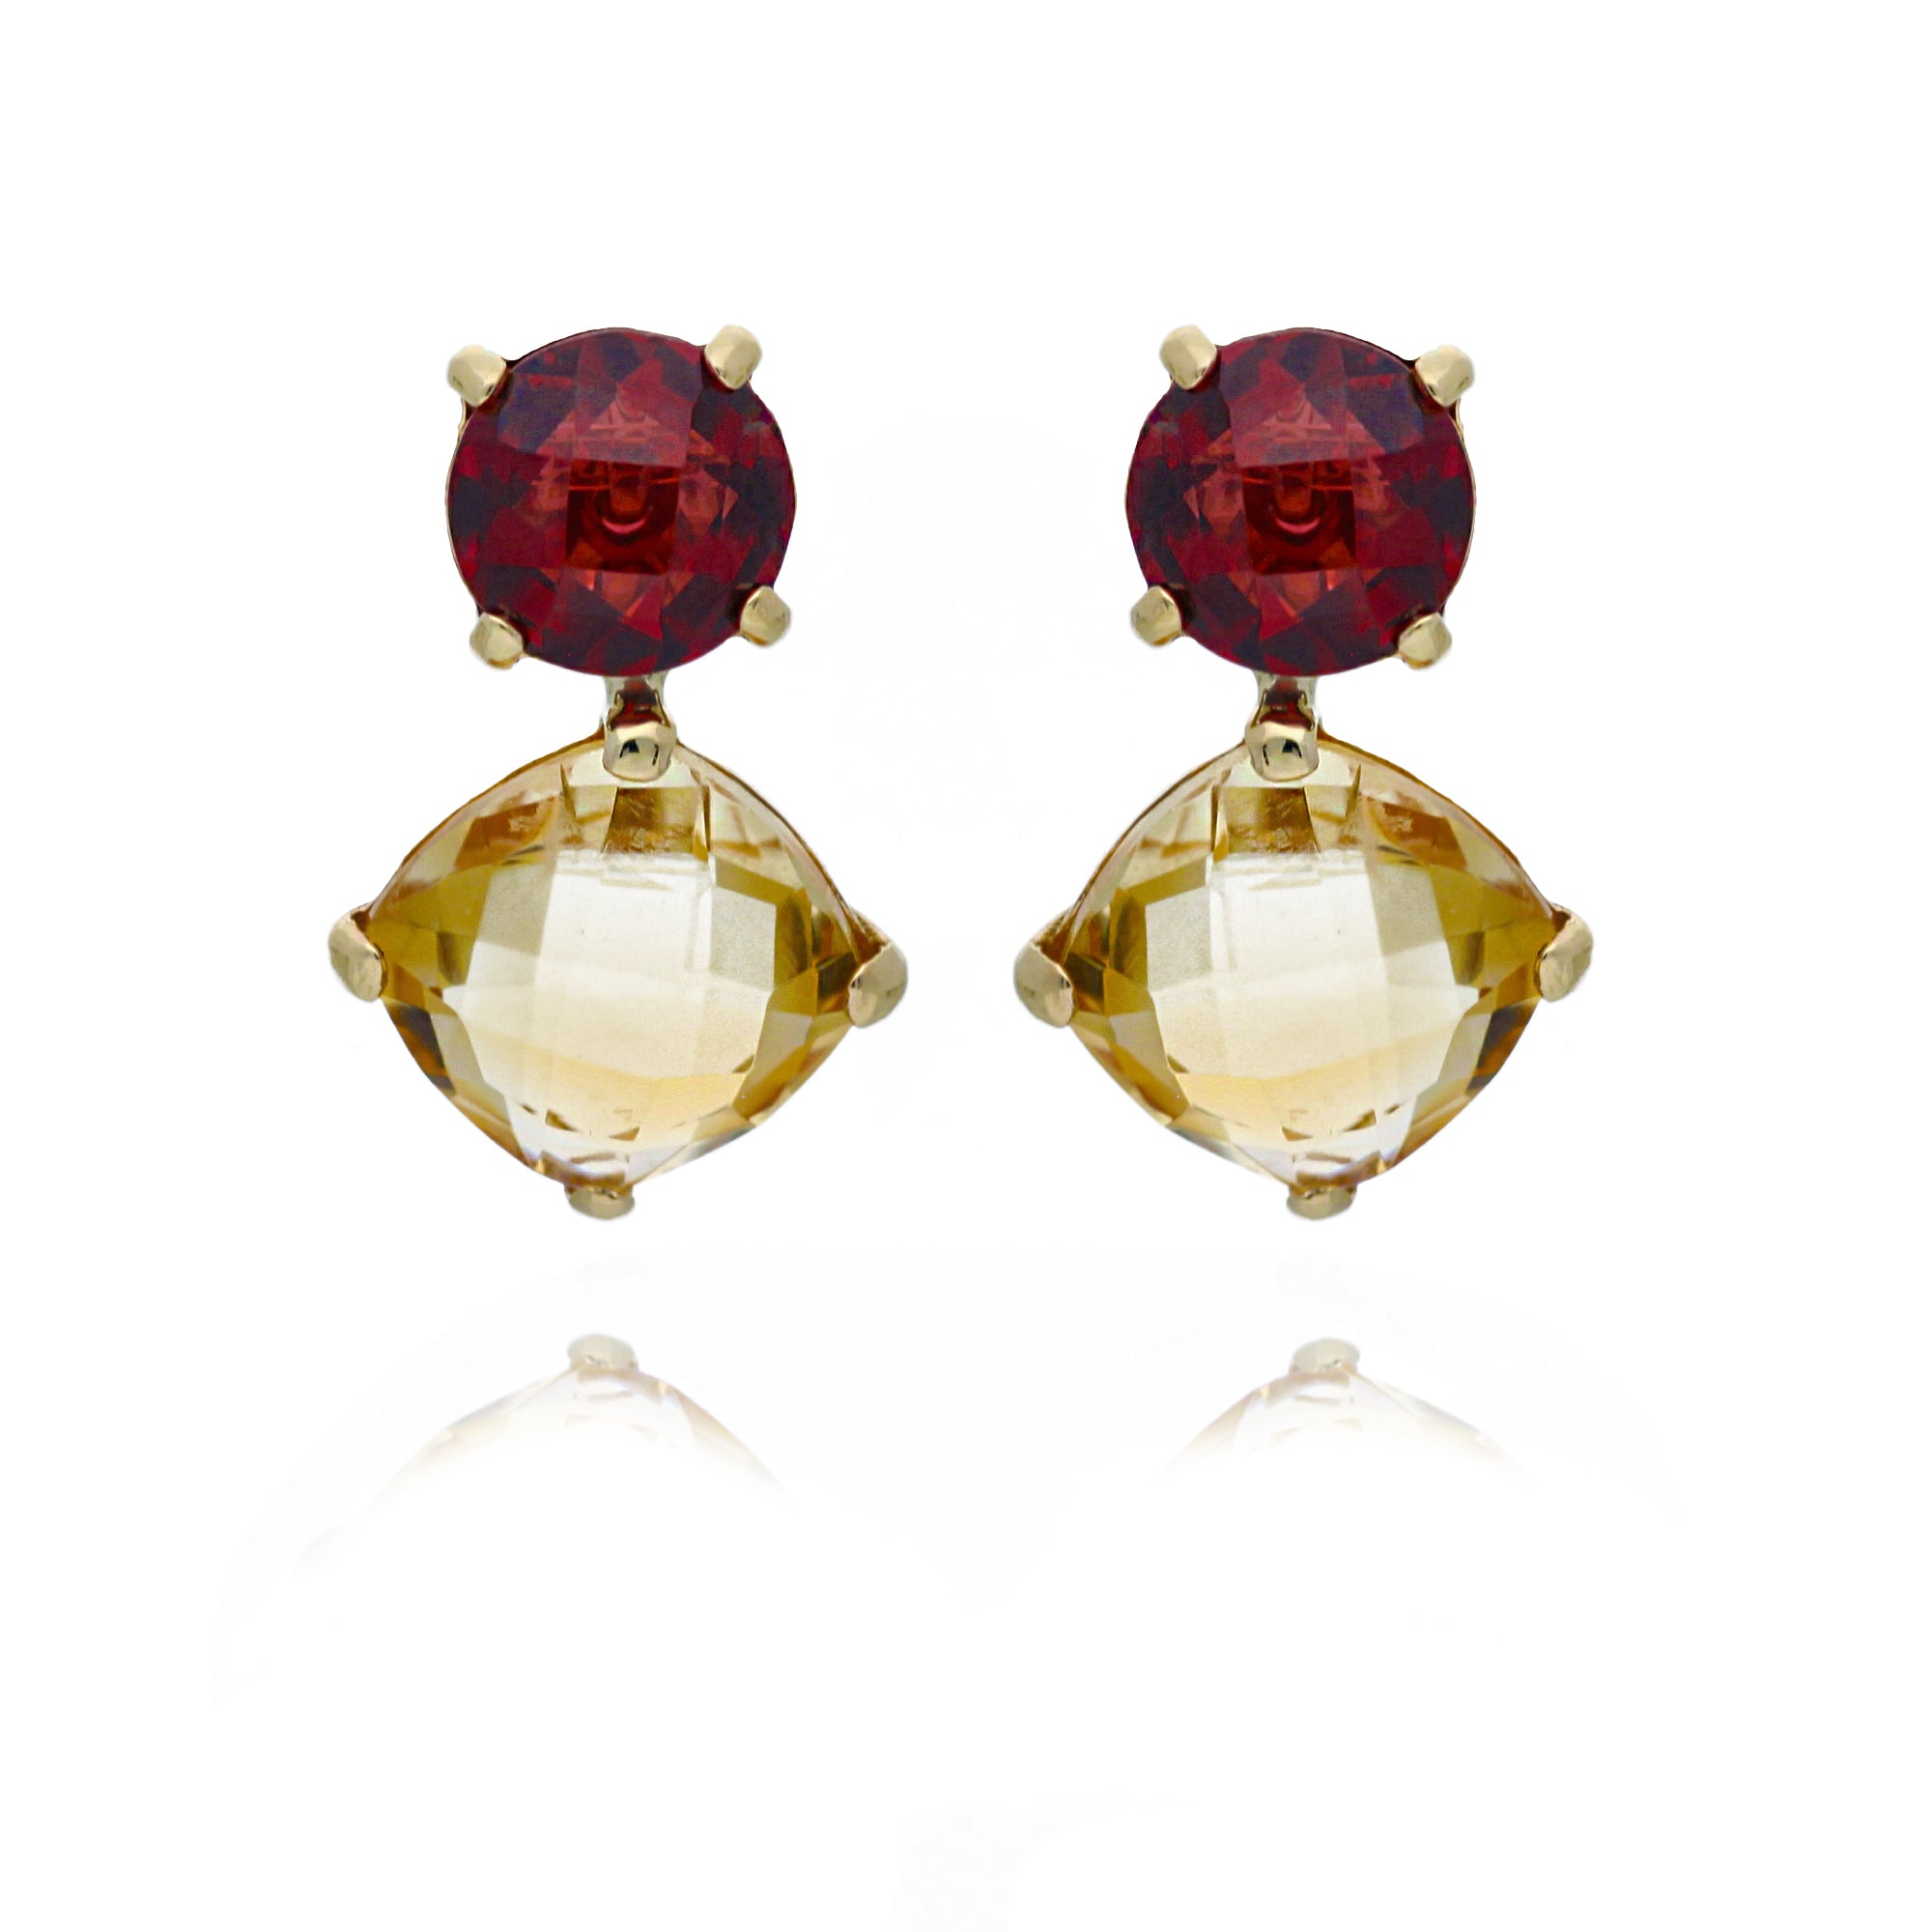 Garnet and Citrine Earrings in 9ct Yellow Gold